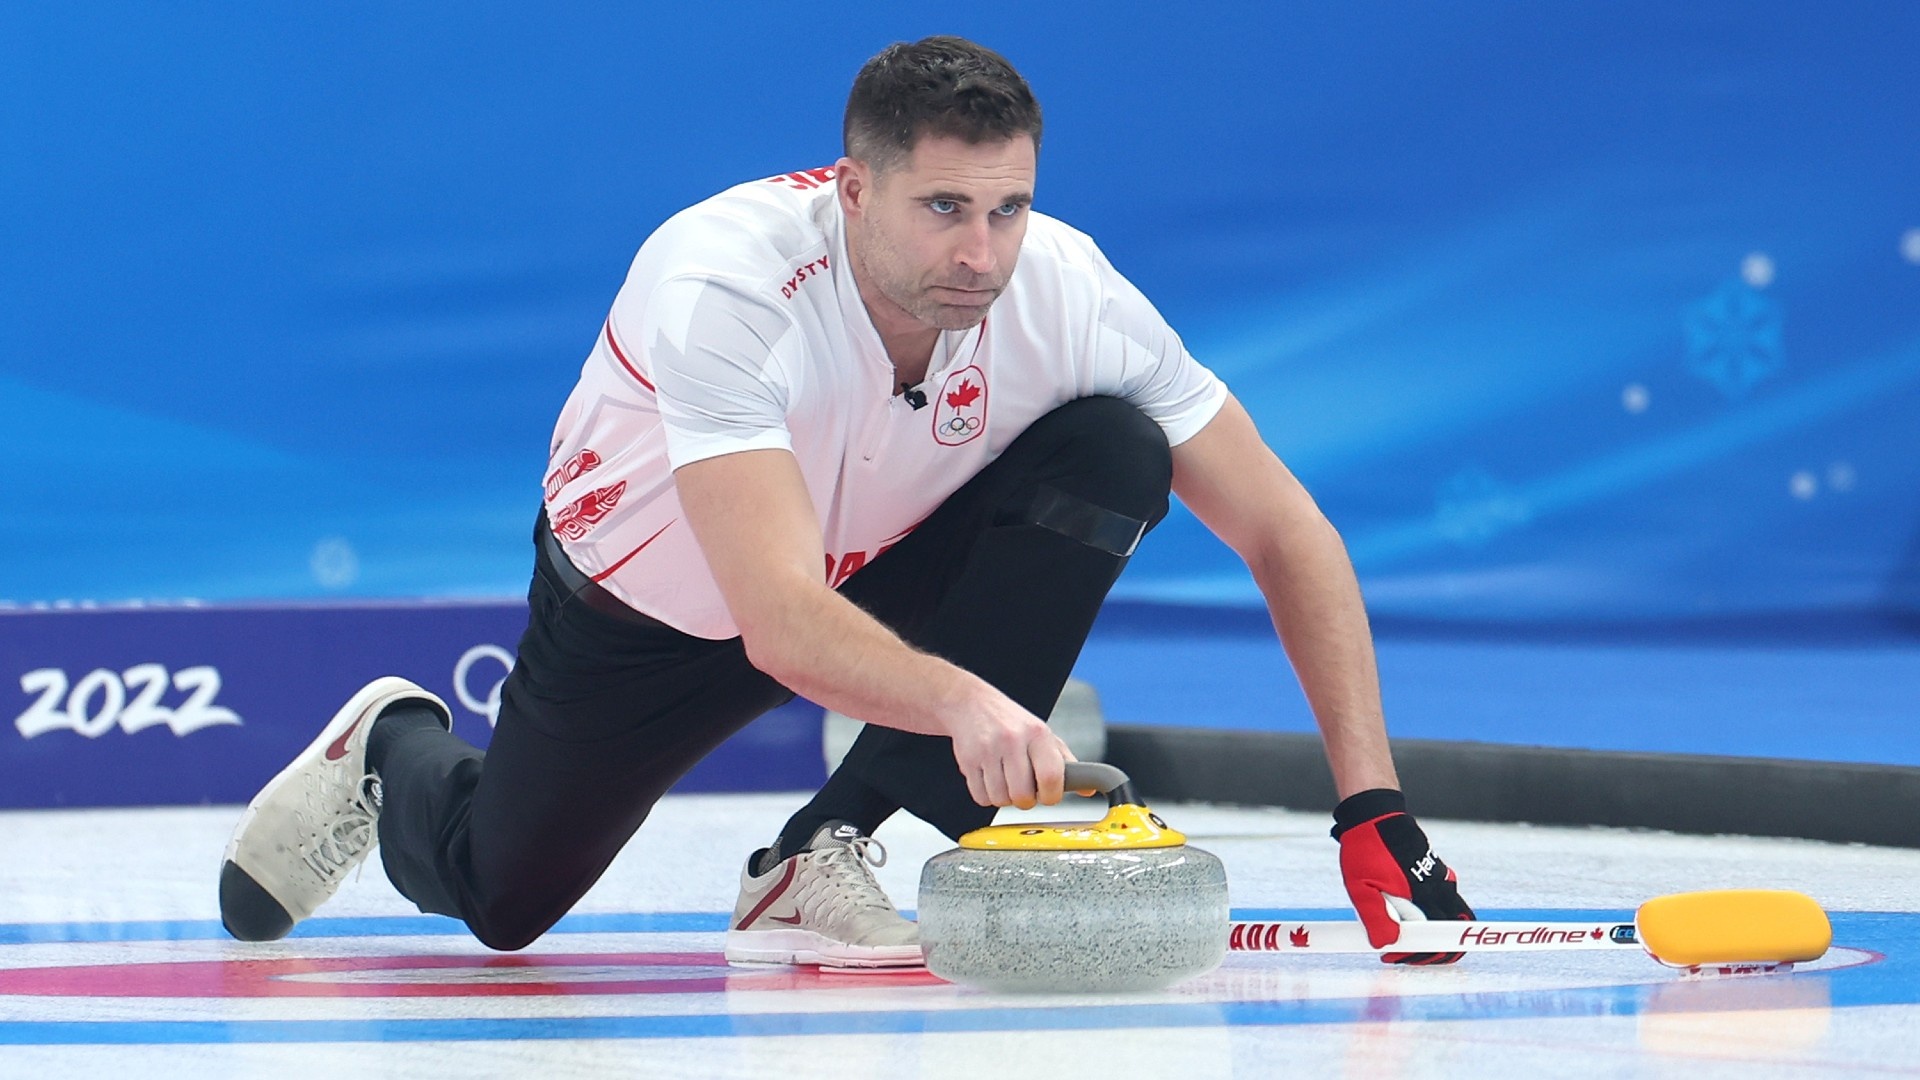 Canada curling, Olympic standings, Brackets and results, Sporting news, 1920x1080 Full HD Desktop